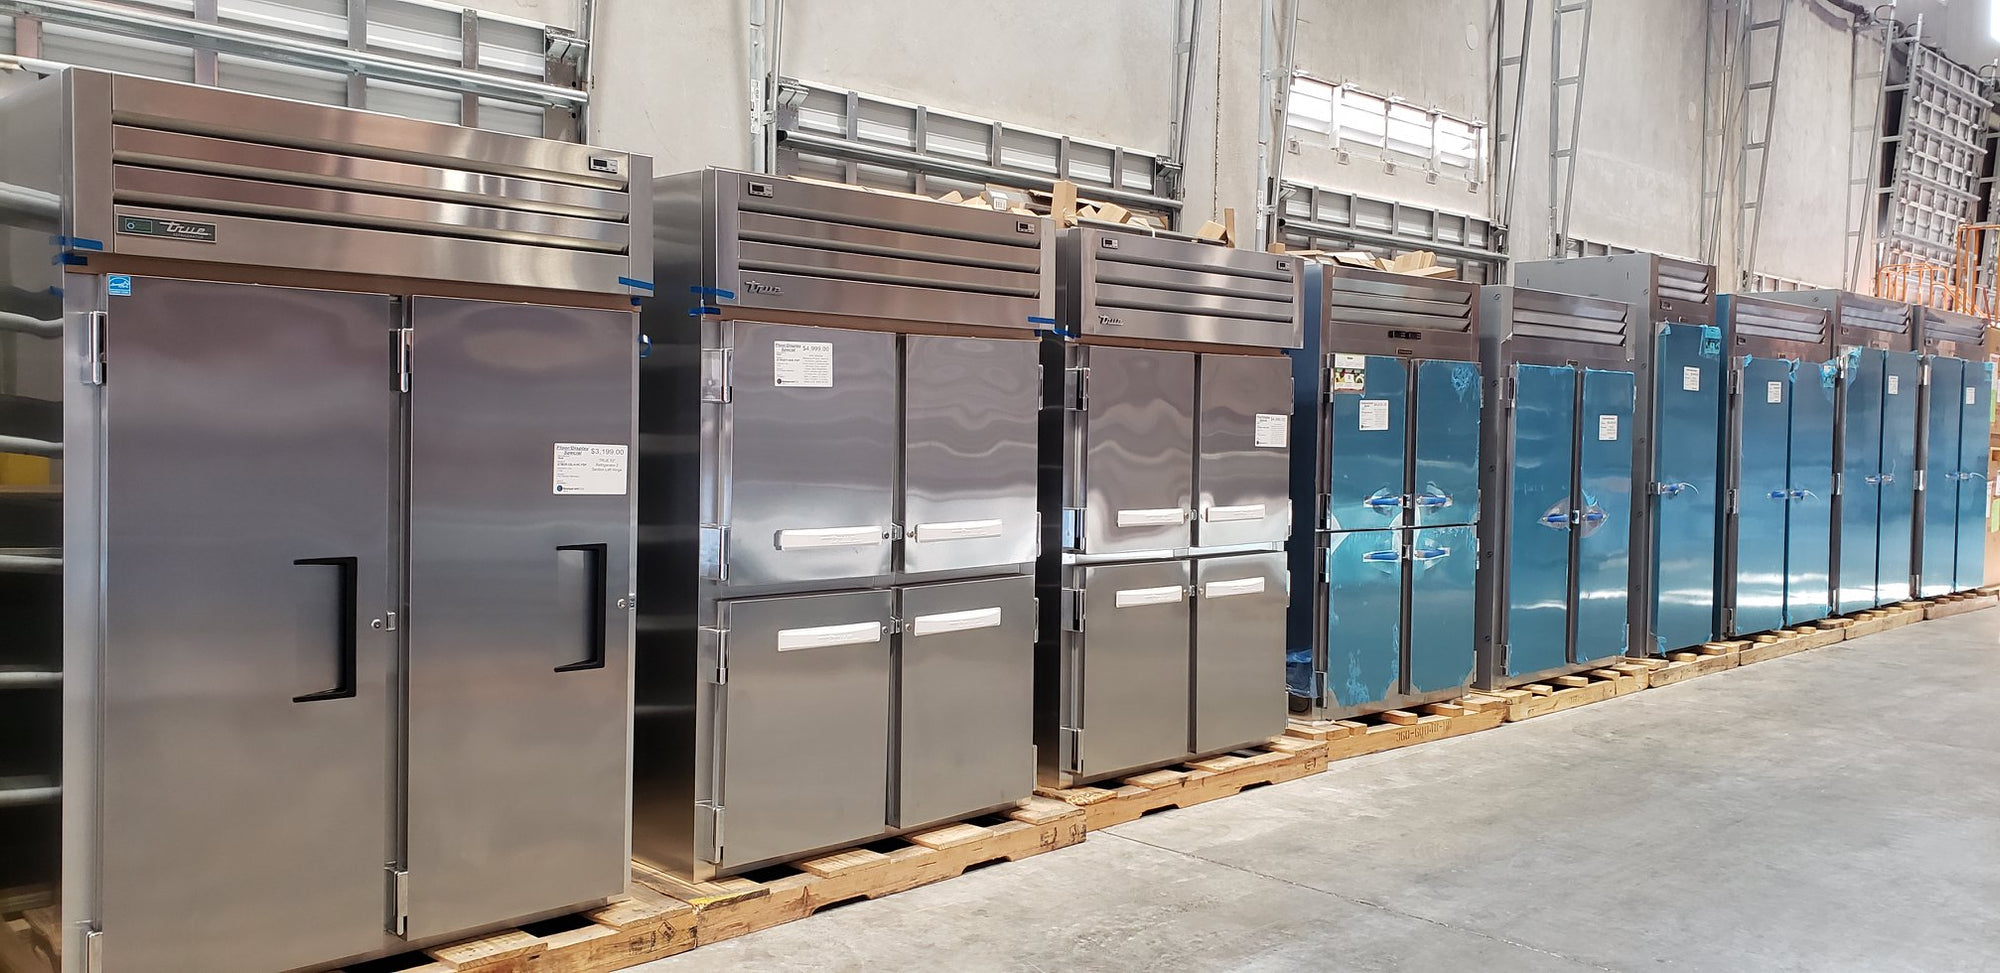 Reach In Refrigerators & Freezers, Pass-through/Roll-through units available from True, Traulsen, Beverage Air, Victory, Padela, Delfield, and more!  All sizes and configurations in stock and priced great!